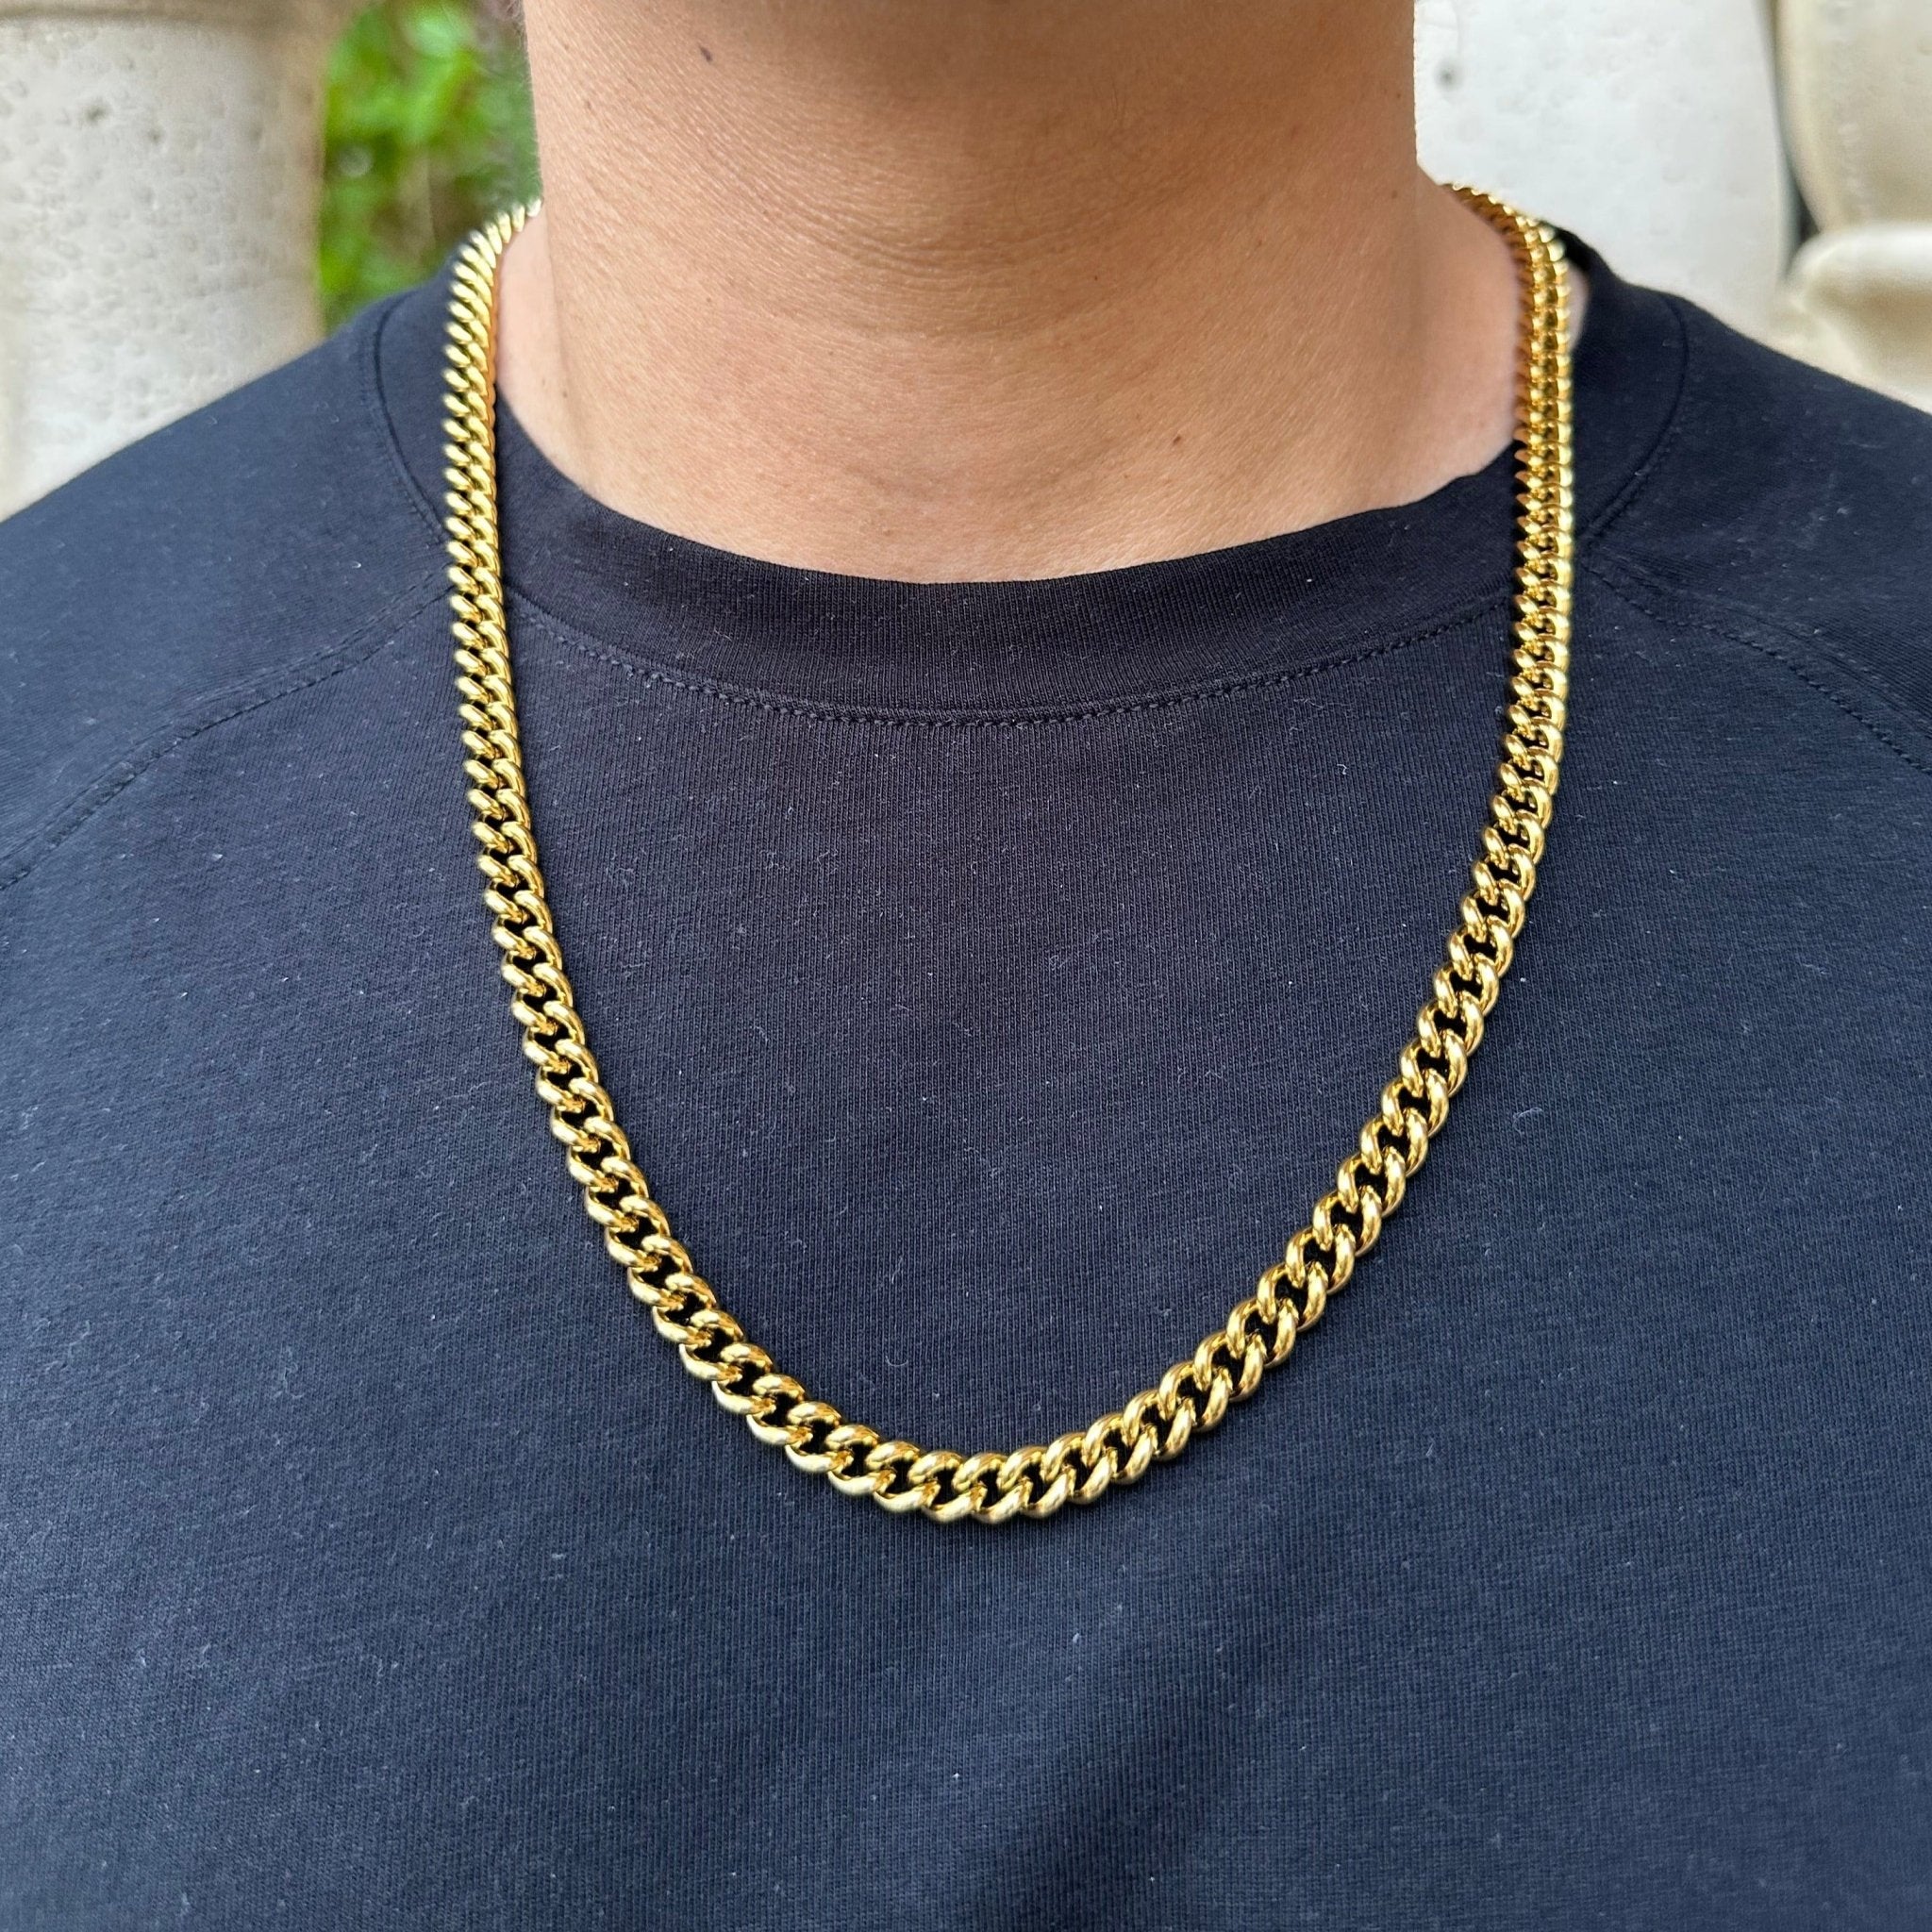 Men's Round Chain Necklace Silver / Gold